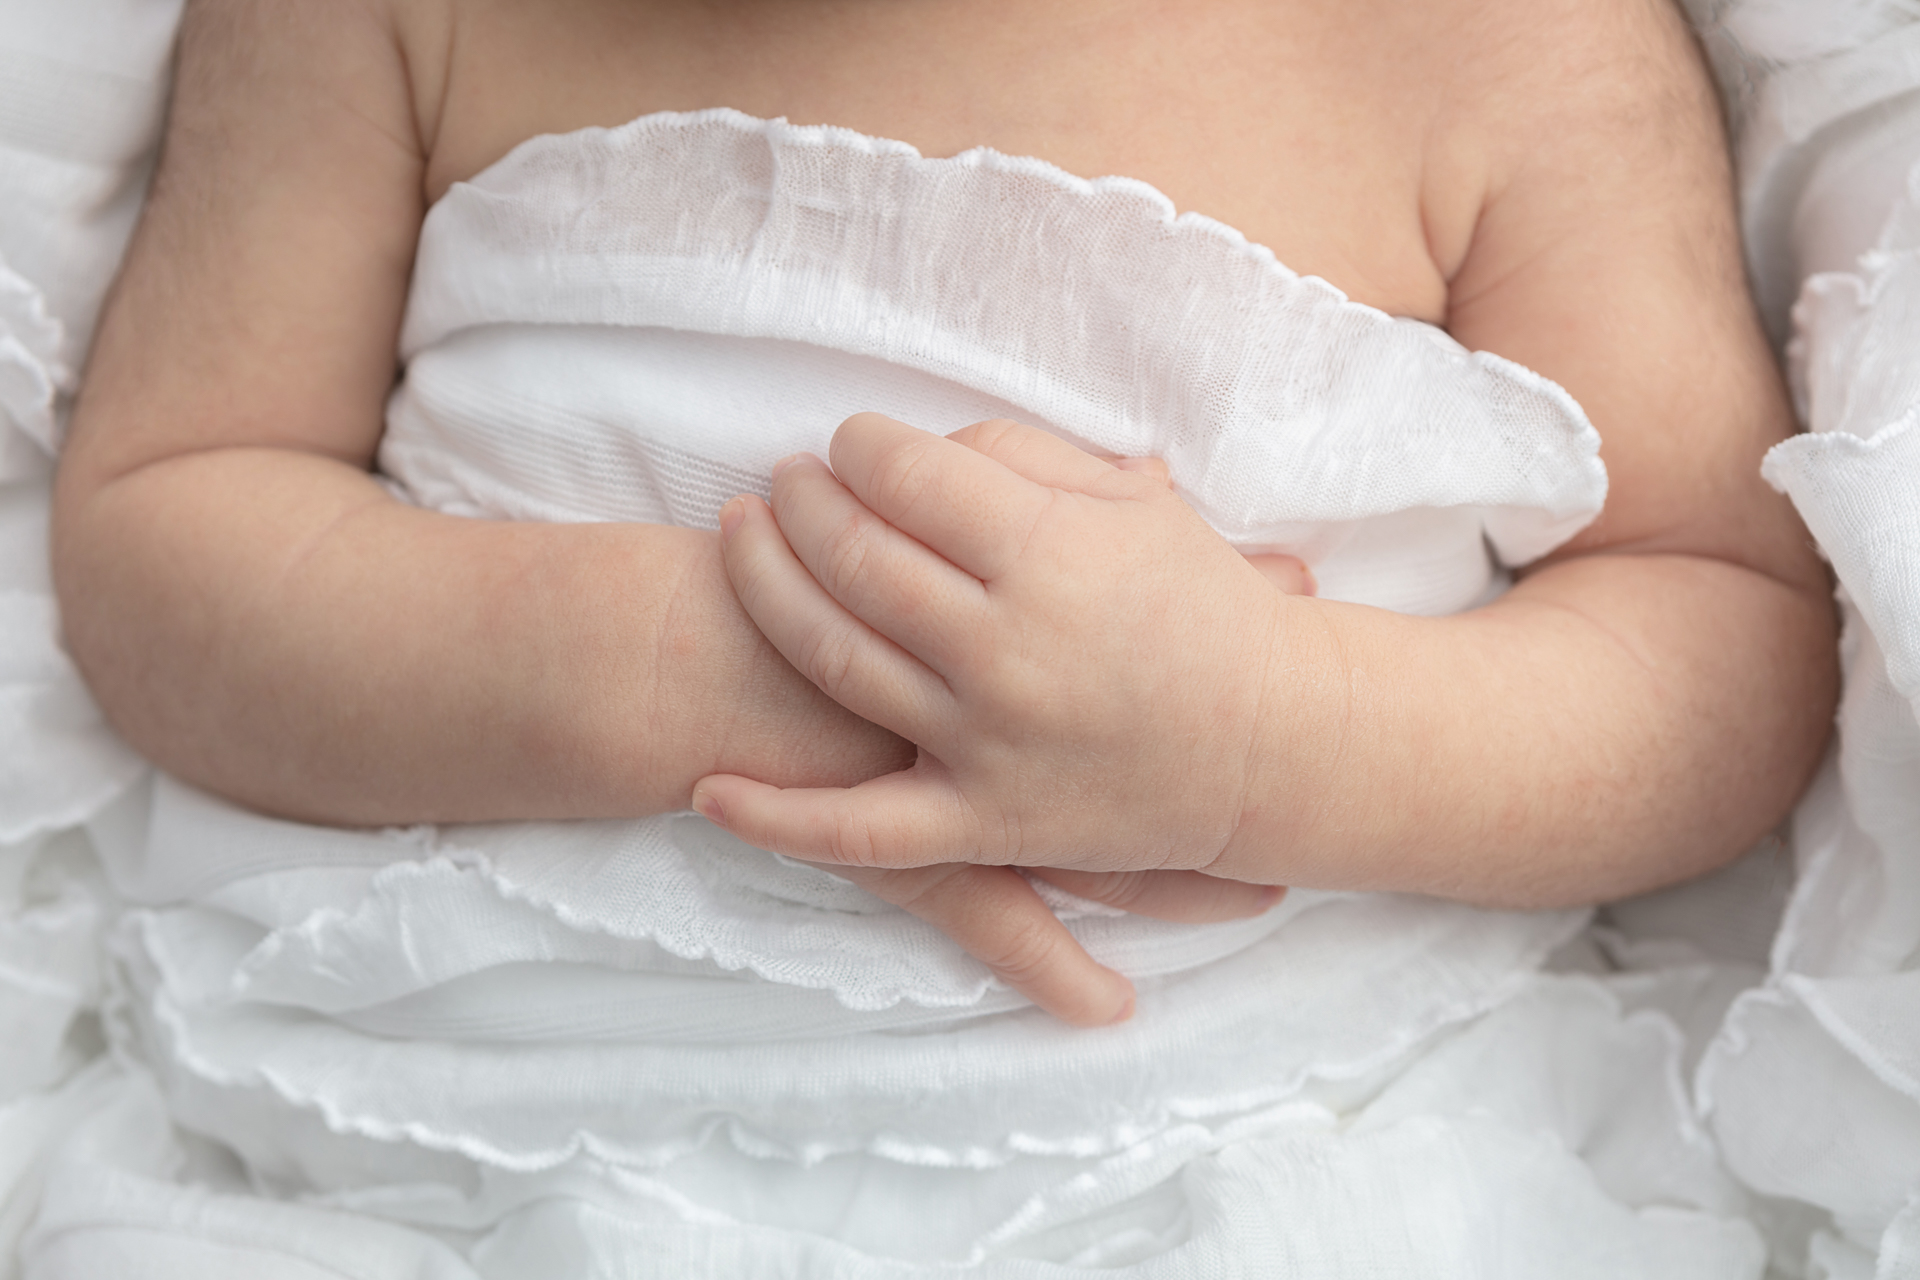 newborn baby hands folded across her belly; white blanket with sheer ruffle details